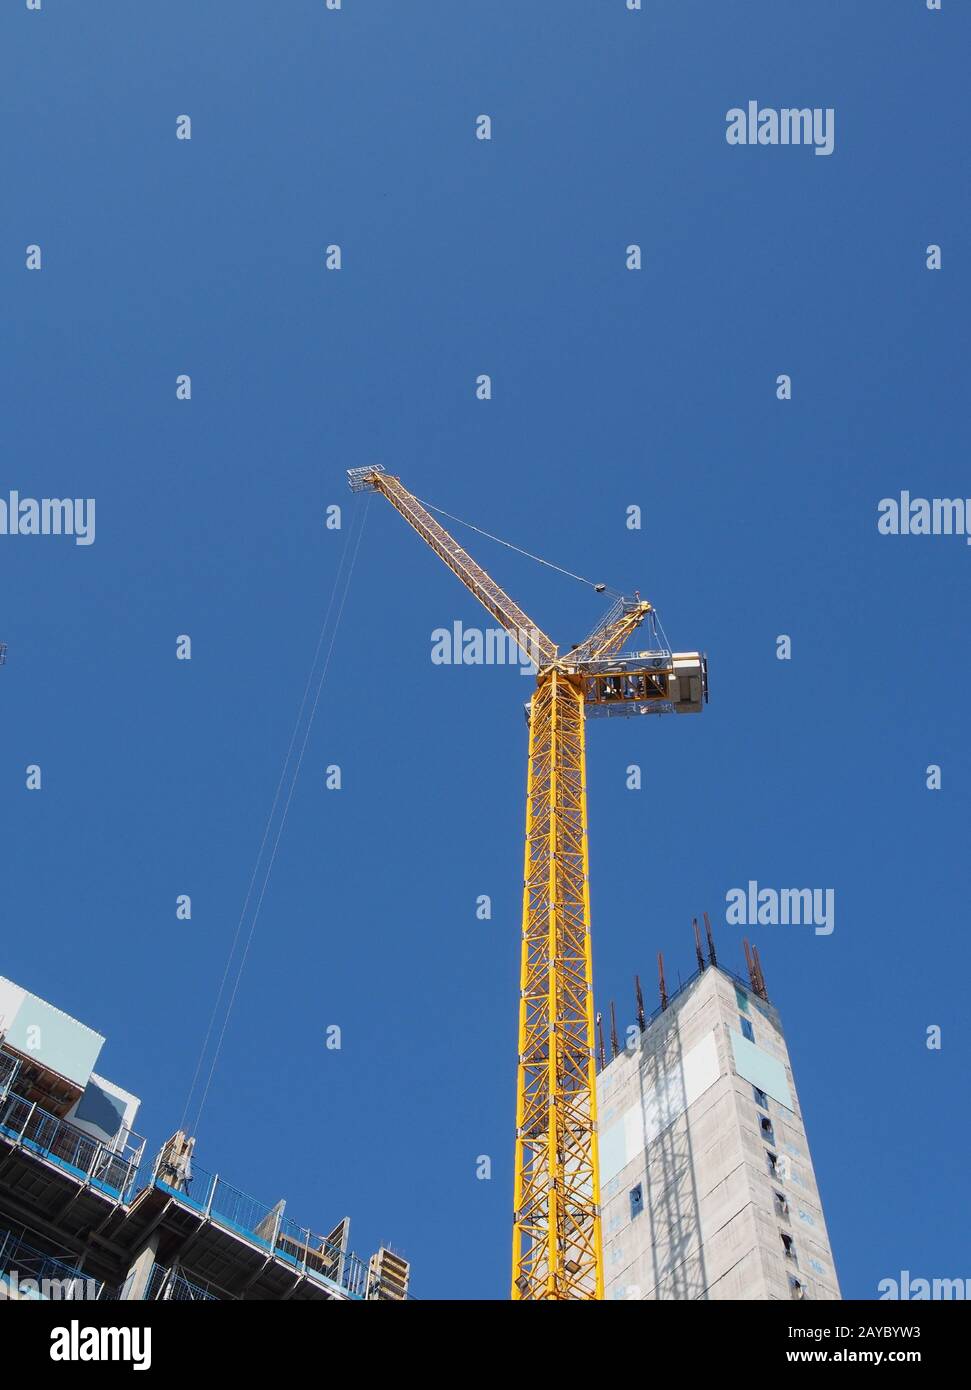 a view of a tall tower crane working on large construction sites against a blue sky Stock Photo